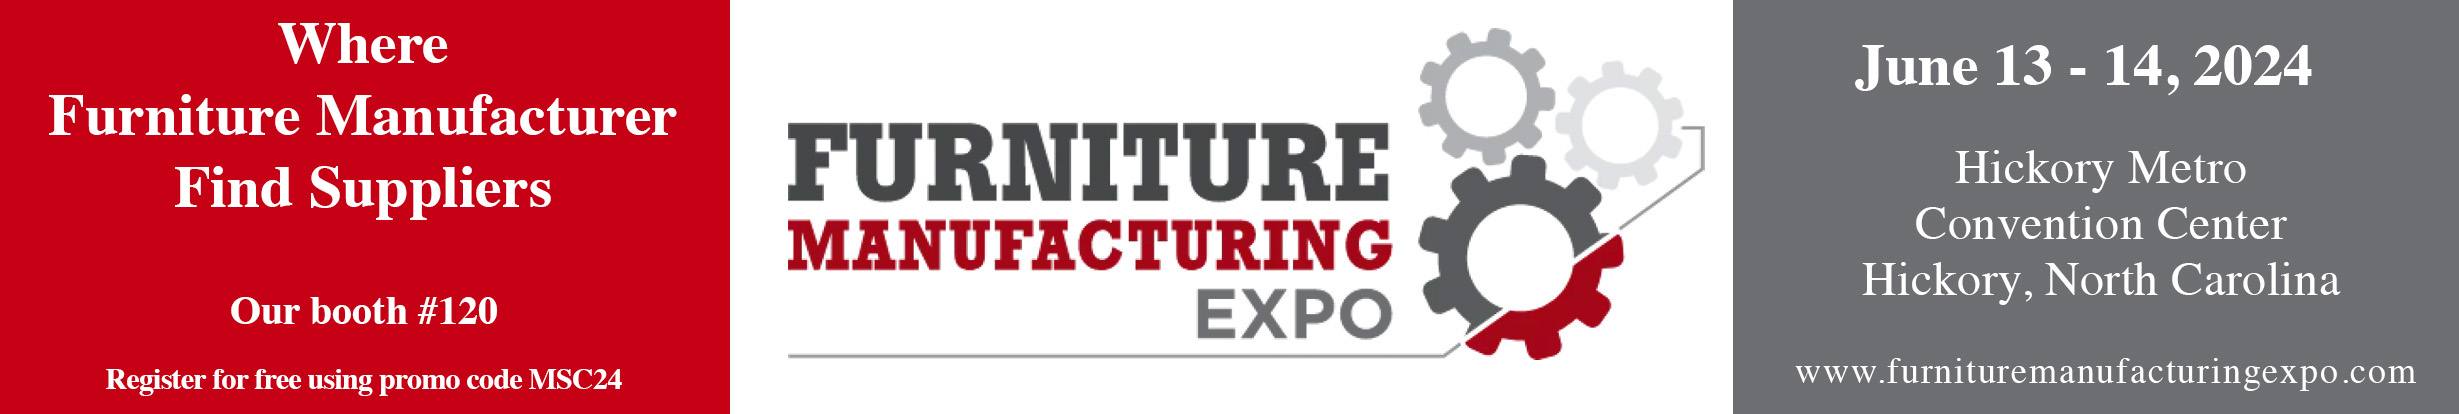 2024 Furniture Manufacturing Expo June 13-14 at Hickory Convention Center